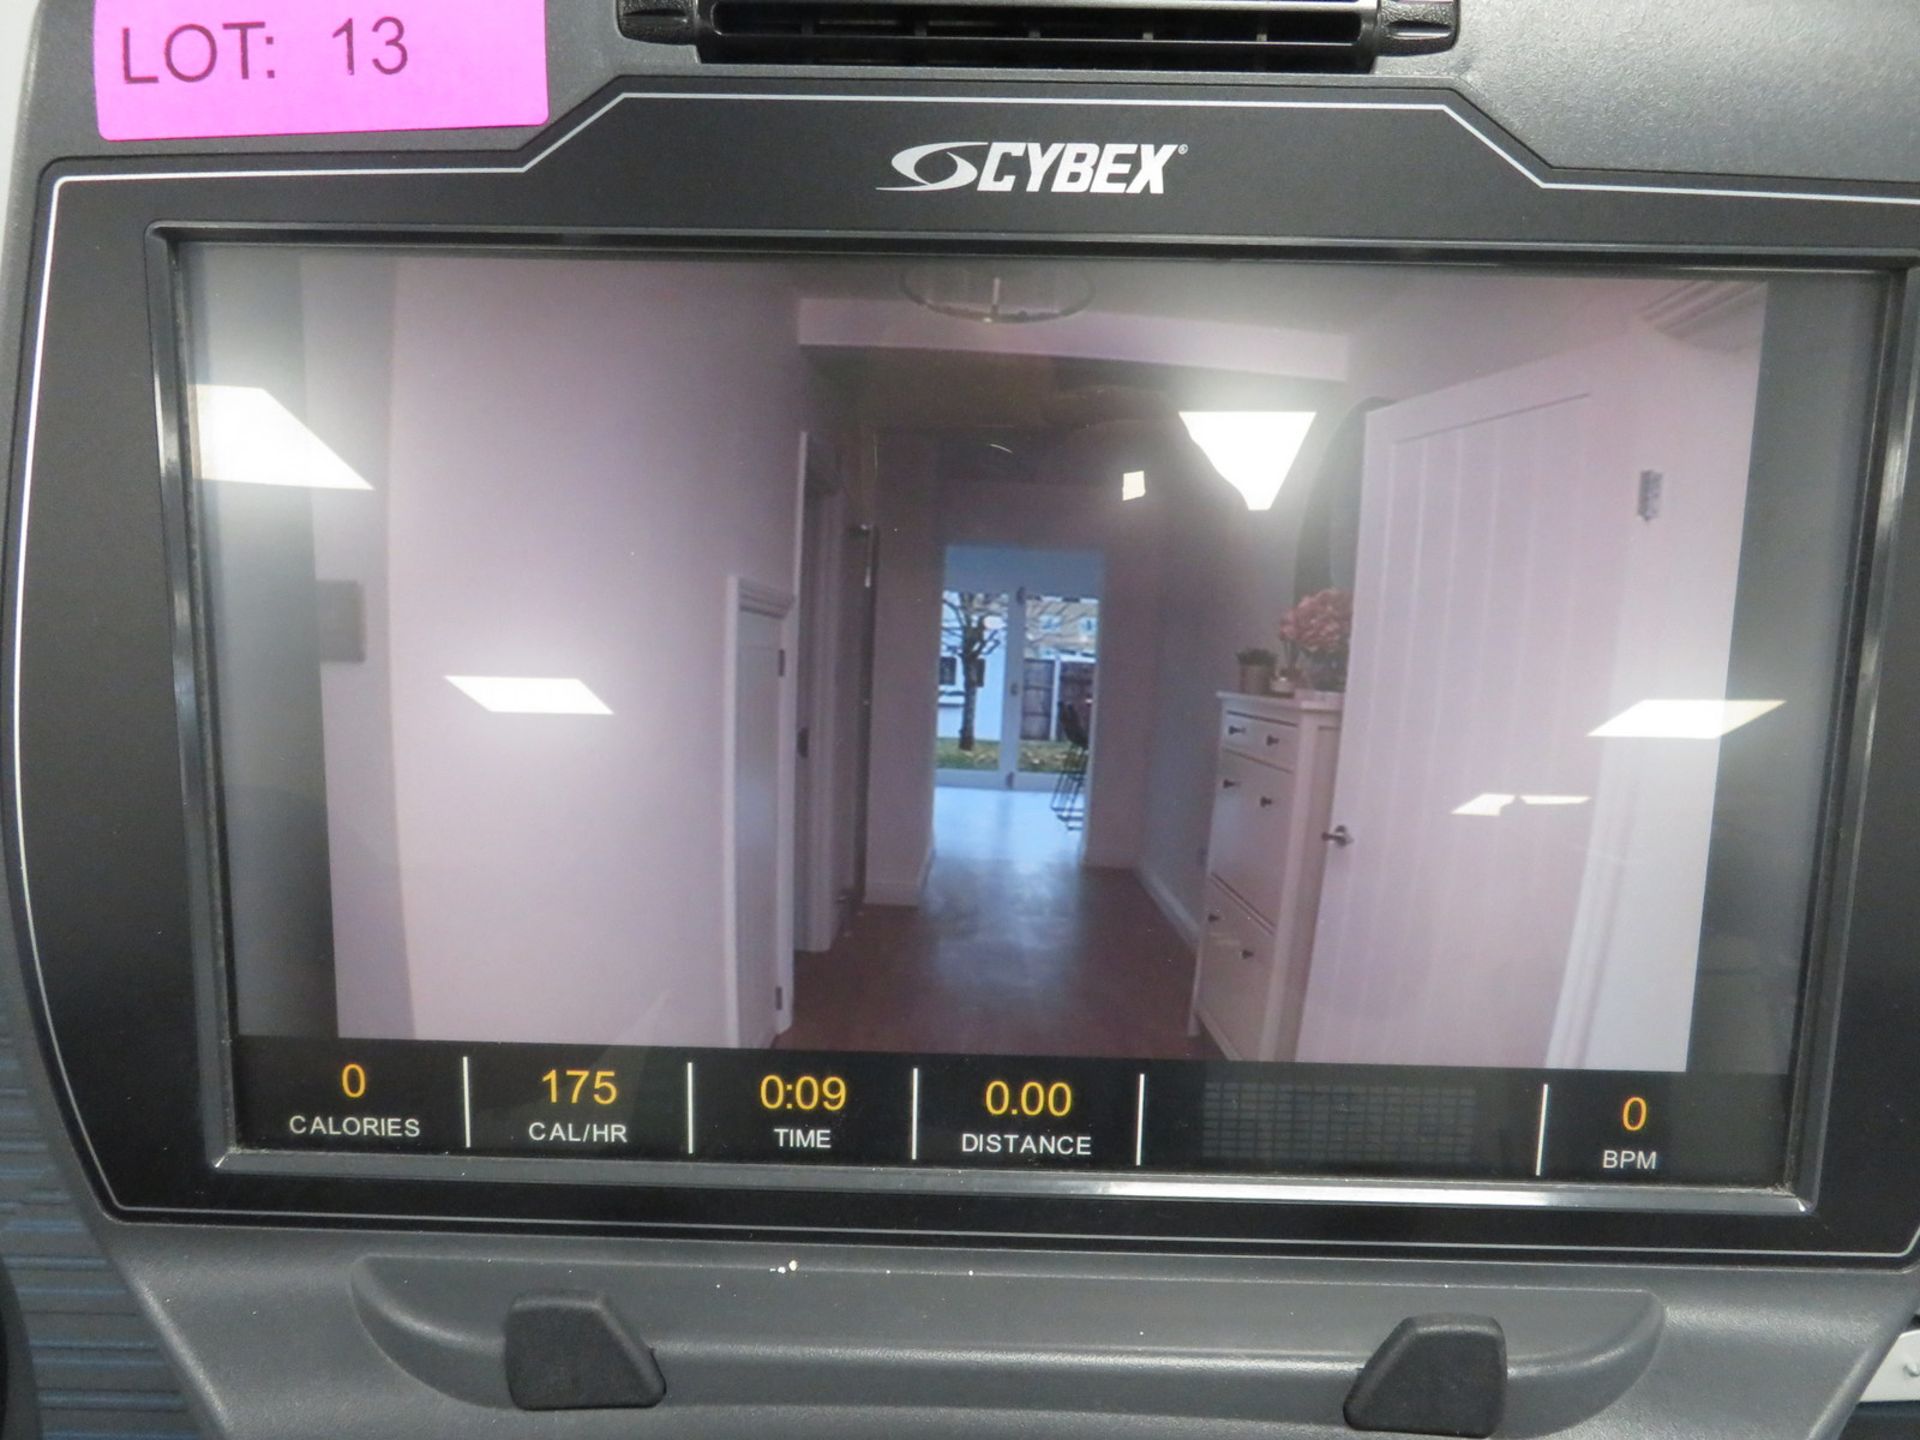 Cybex Arc Trainer Model: 772AT. Working Condition With TV Display Monitor. - Image 8 of 11